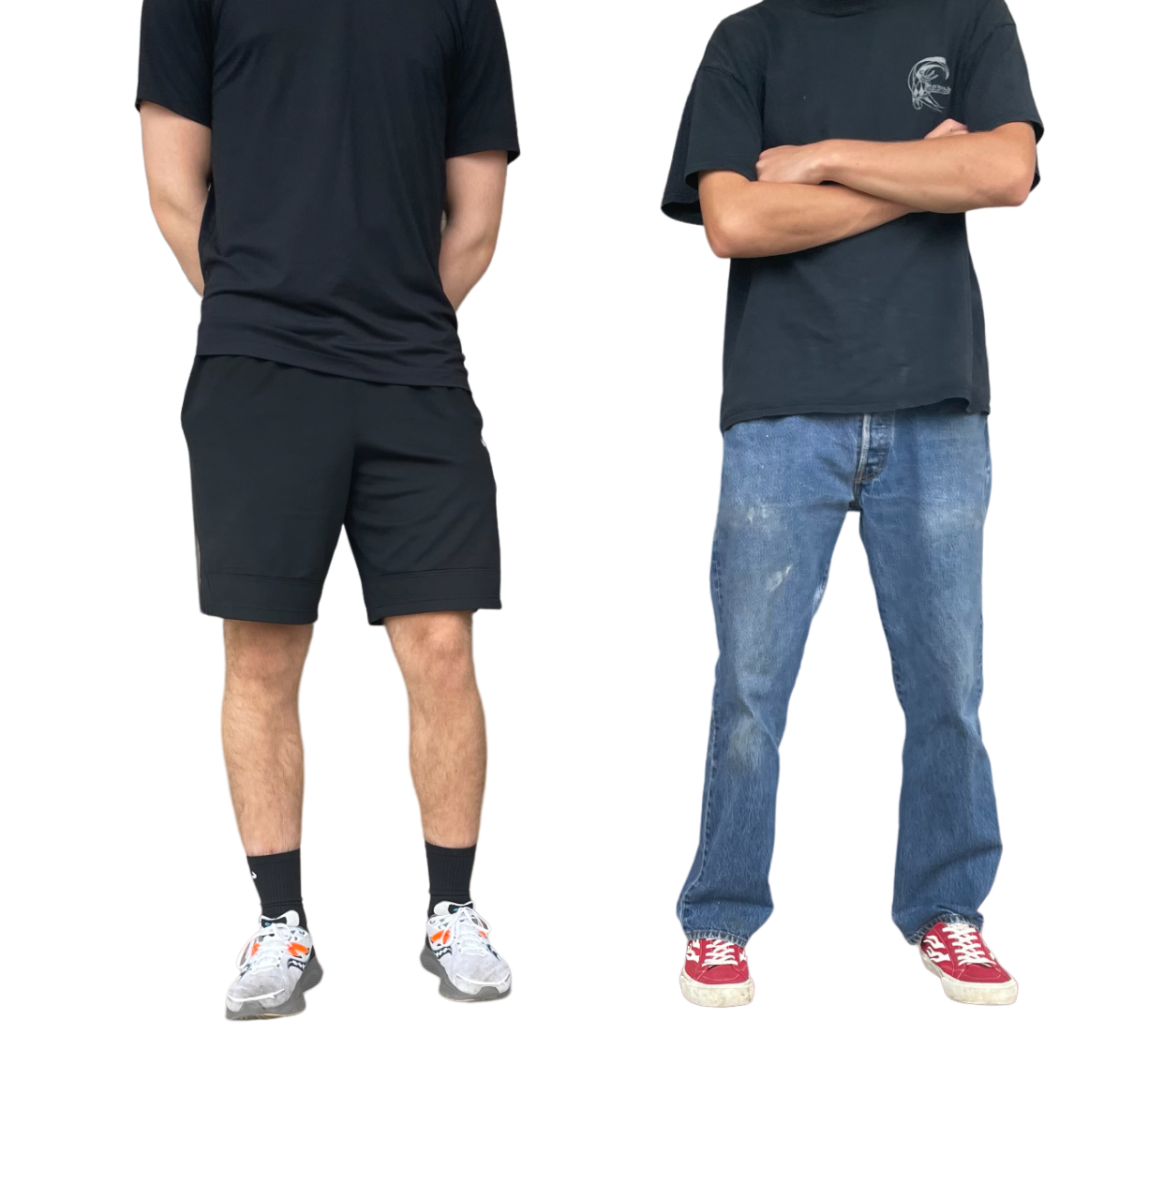 Students dressing down (left) and not dressing down (right) for PE.